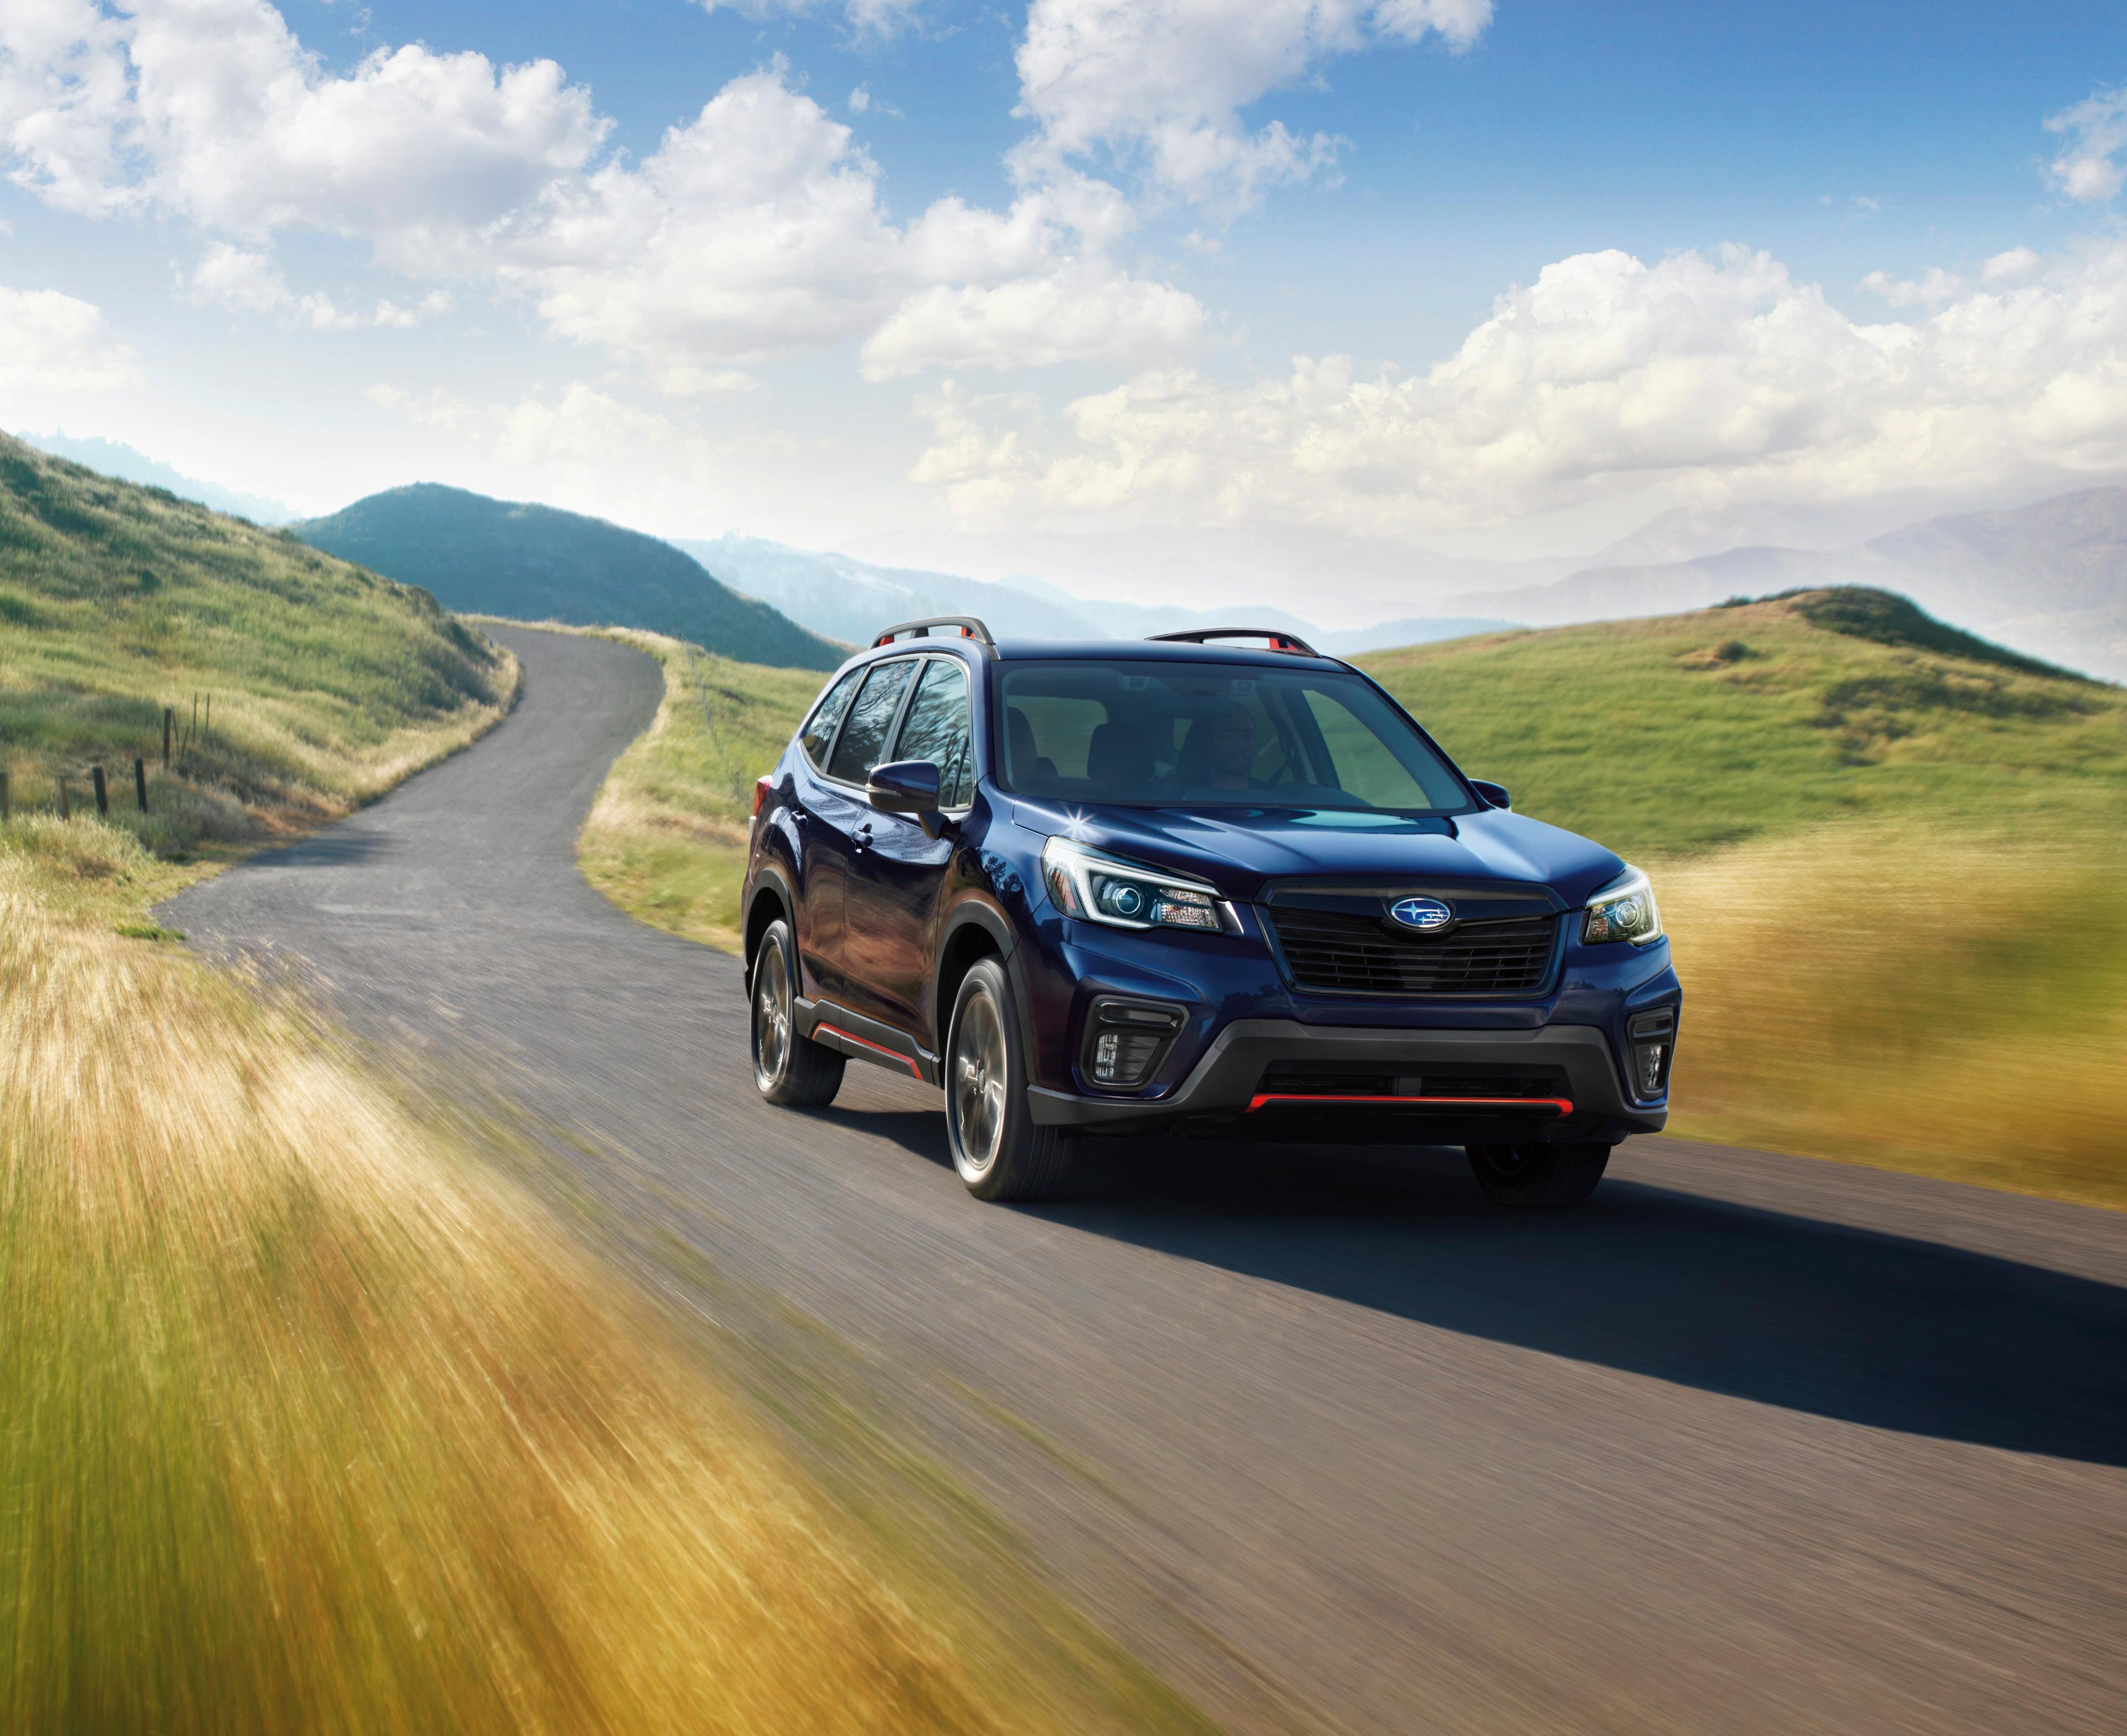 The 2021 Subaru Forester is the best compact SUV according to Consumer Reports.